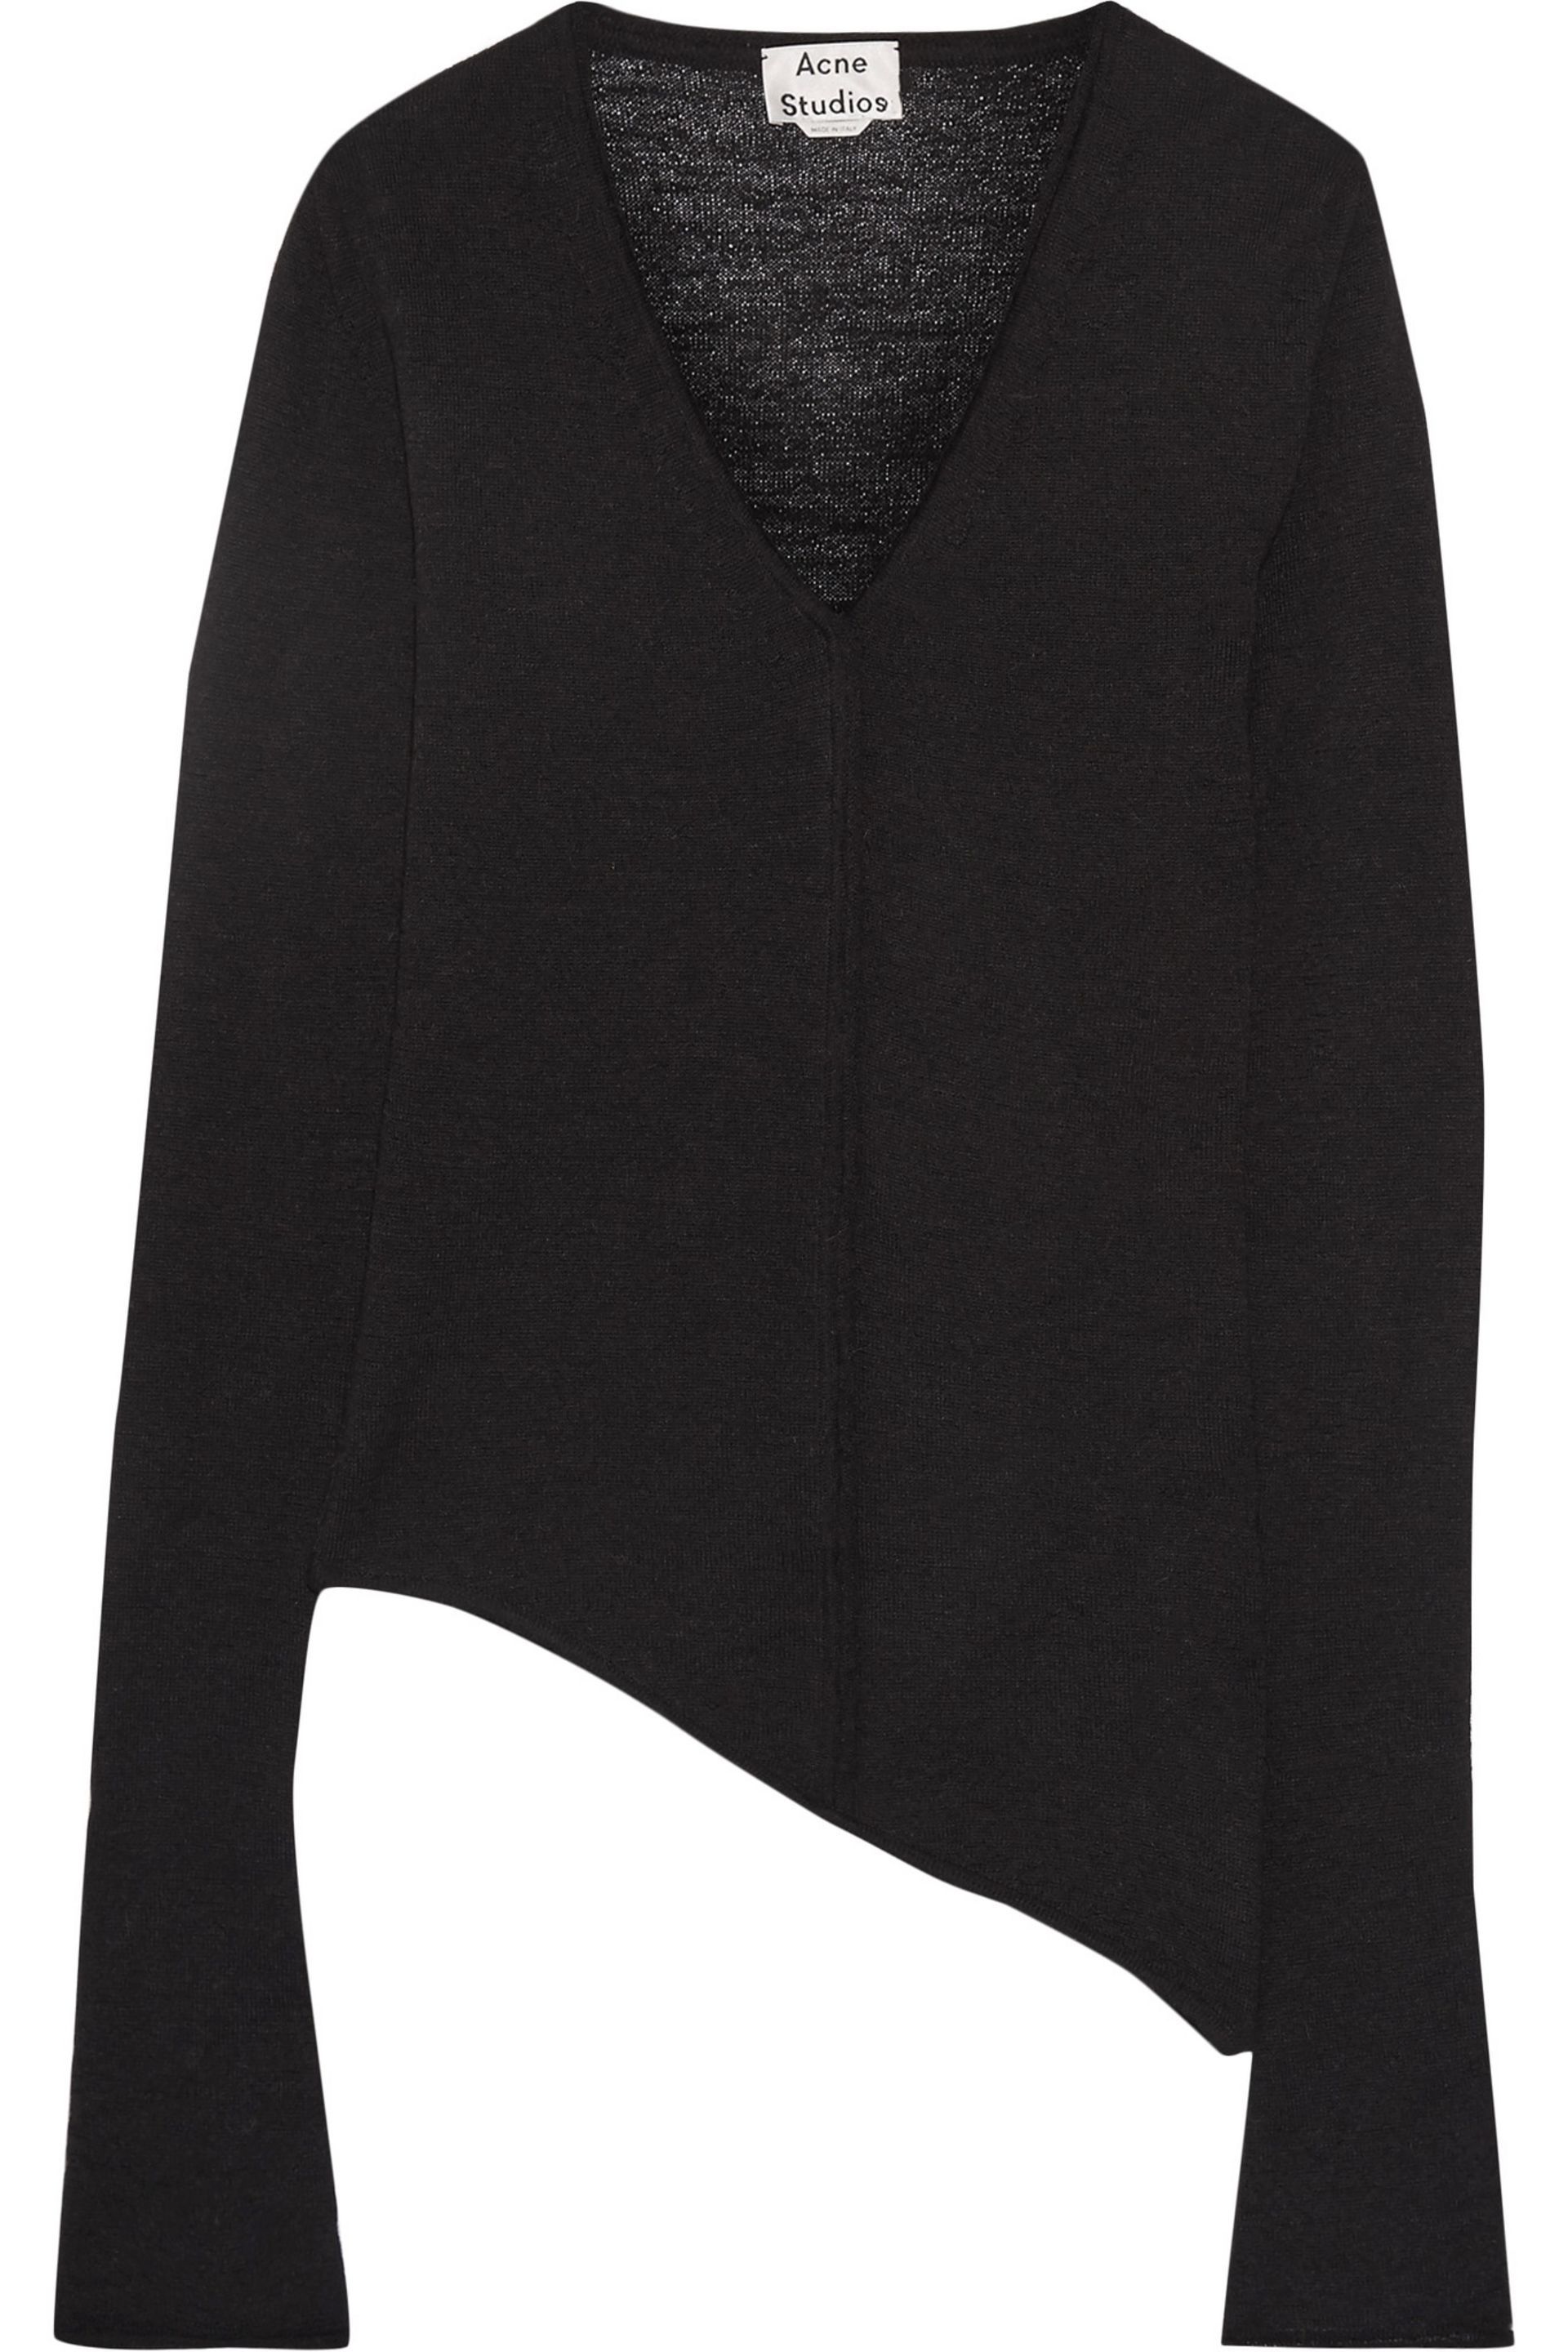 20 Amazing Black Sweaters, Because You Can Never Have Too Many | Oye! Times